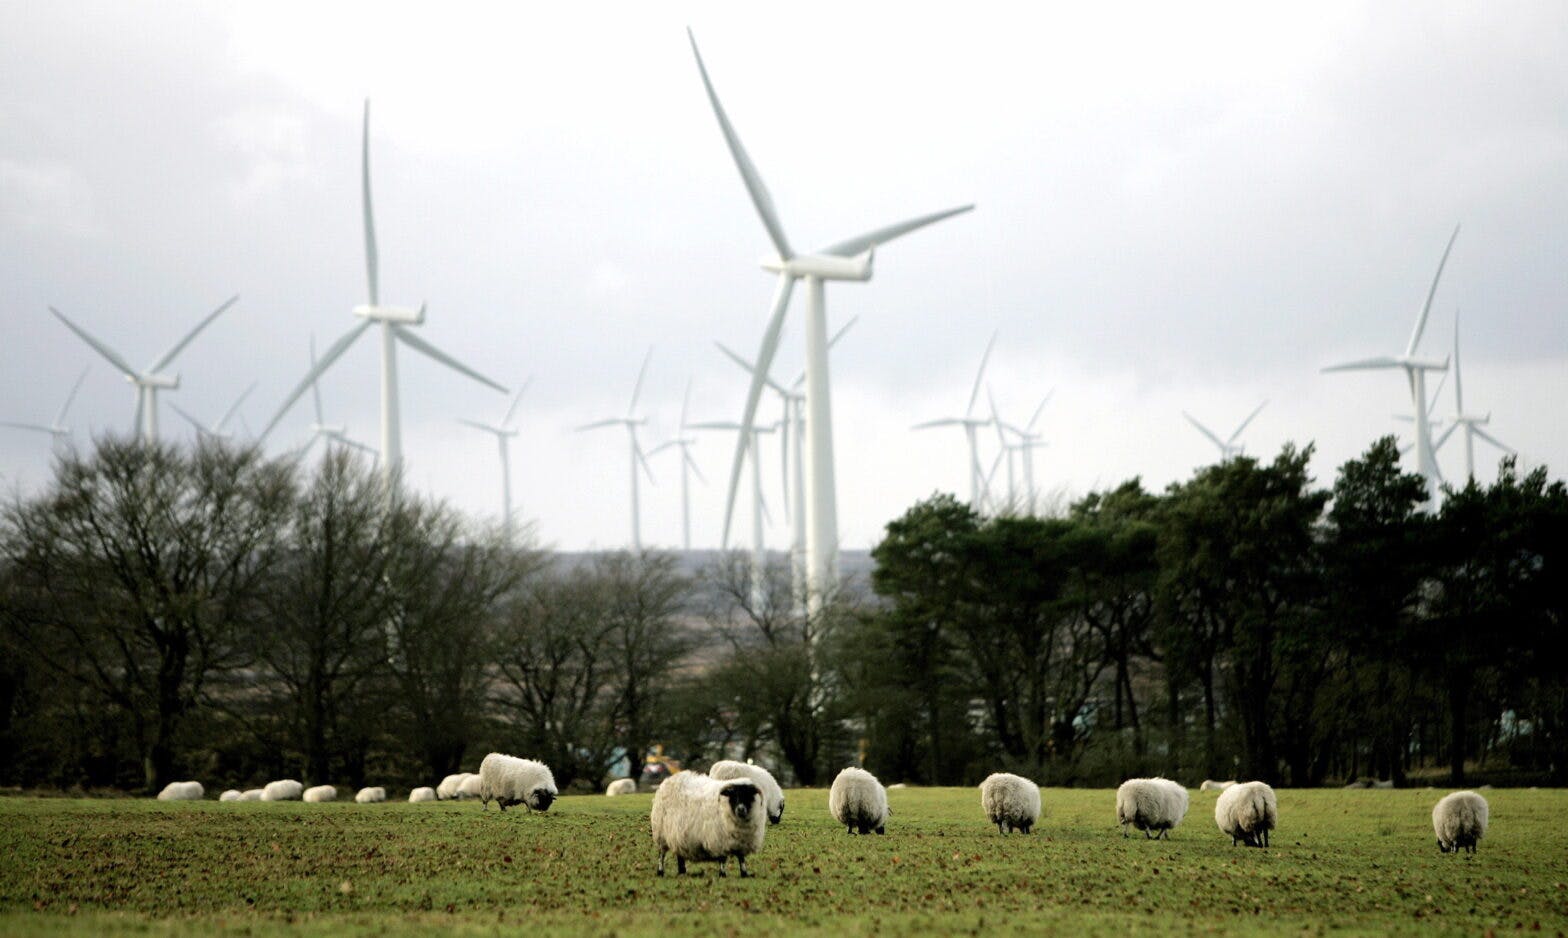 Sheep graze in front of wind turbines at newly opened Black Law wind farm in South Lanarkshire